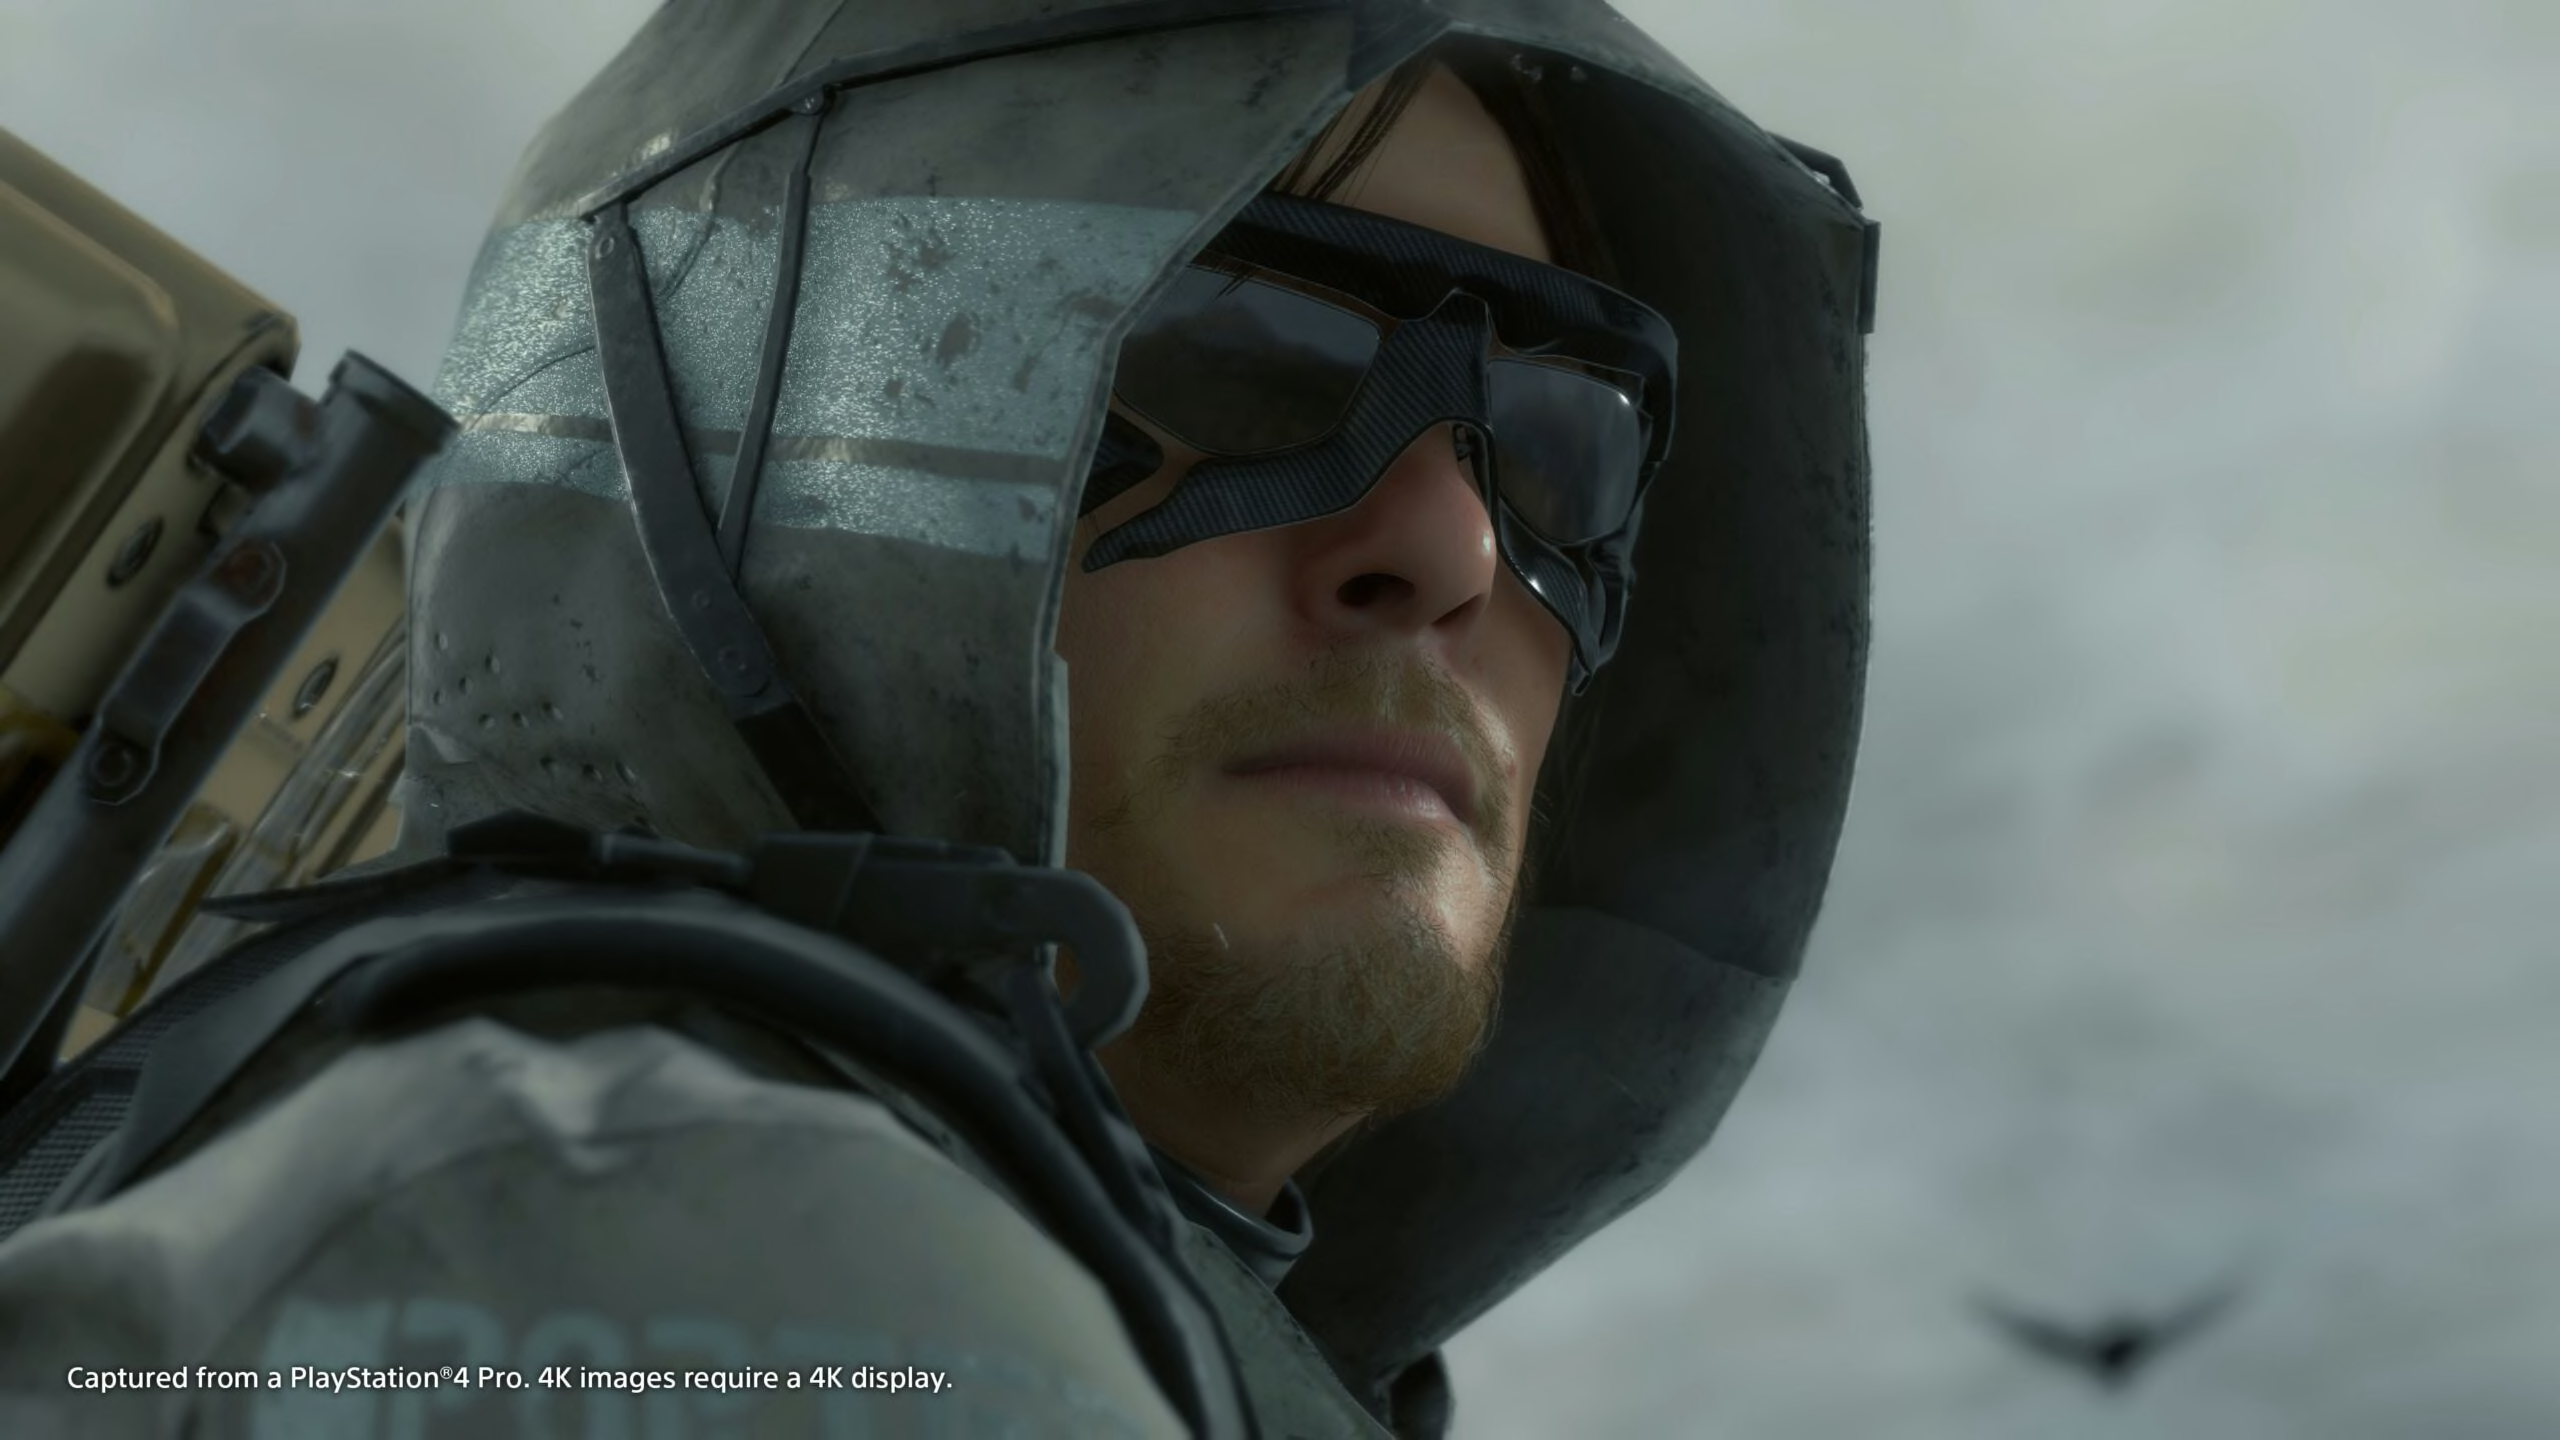 A24 Is Taking on the Death Stranding Movie